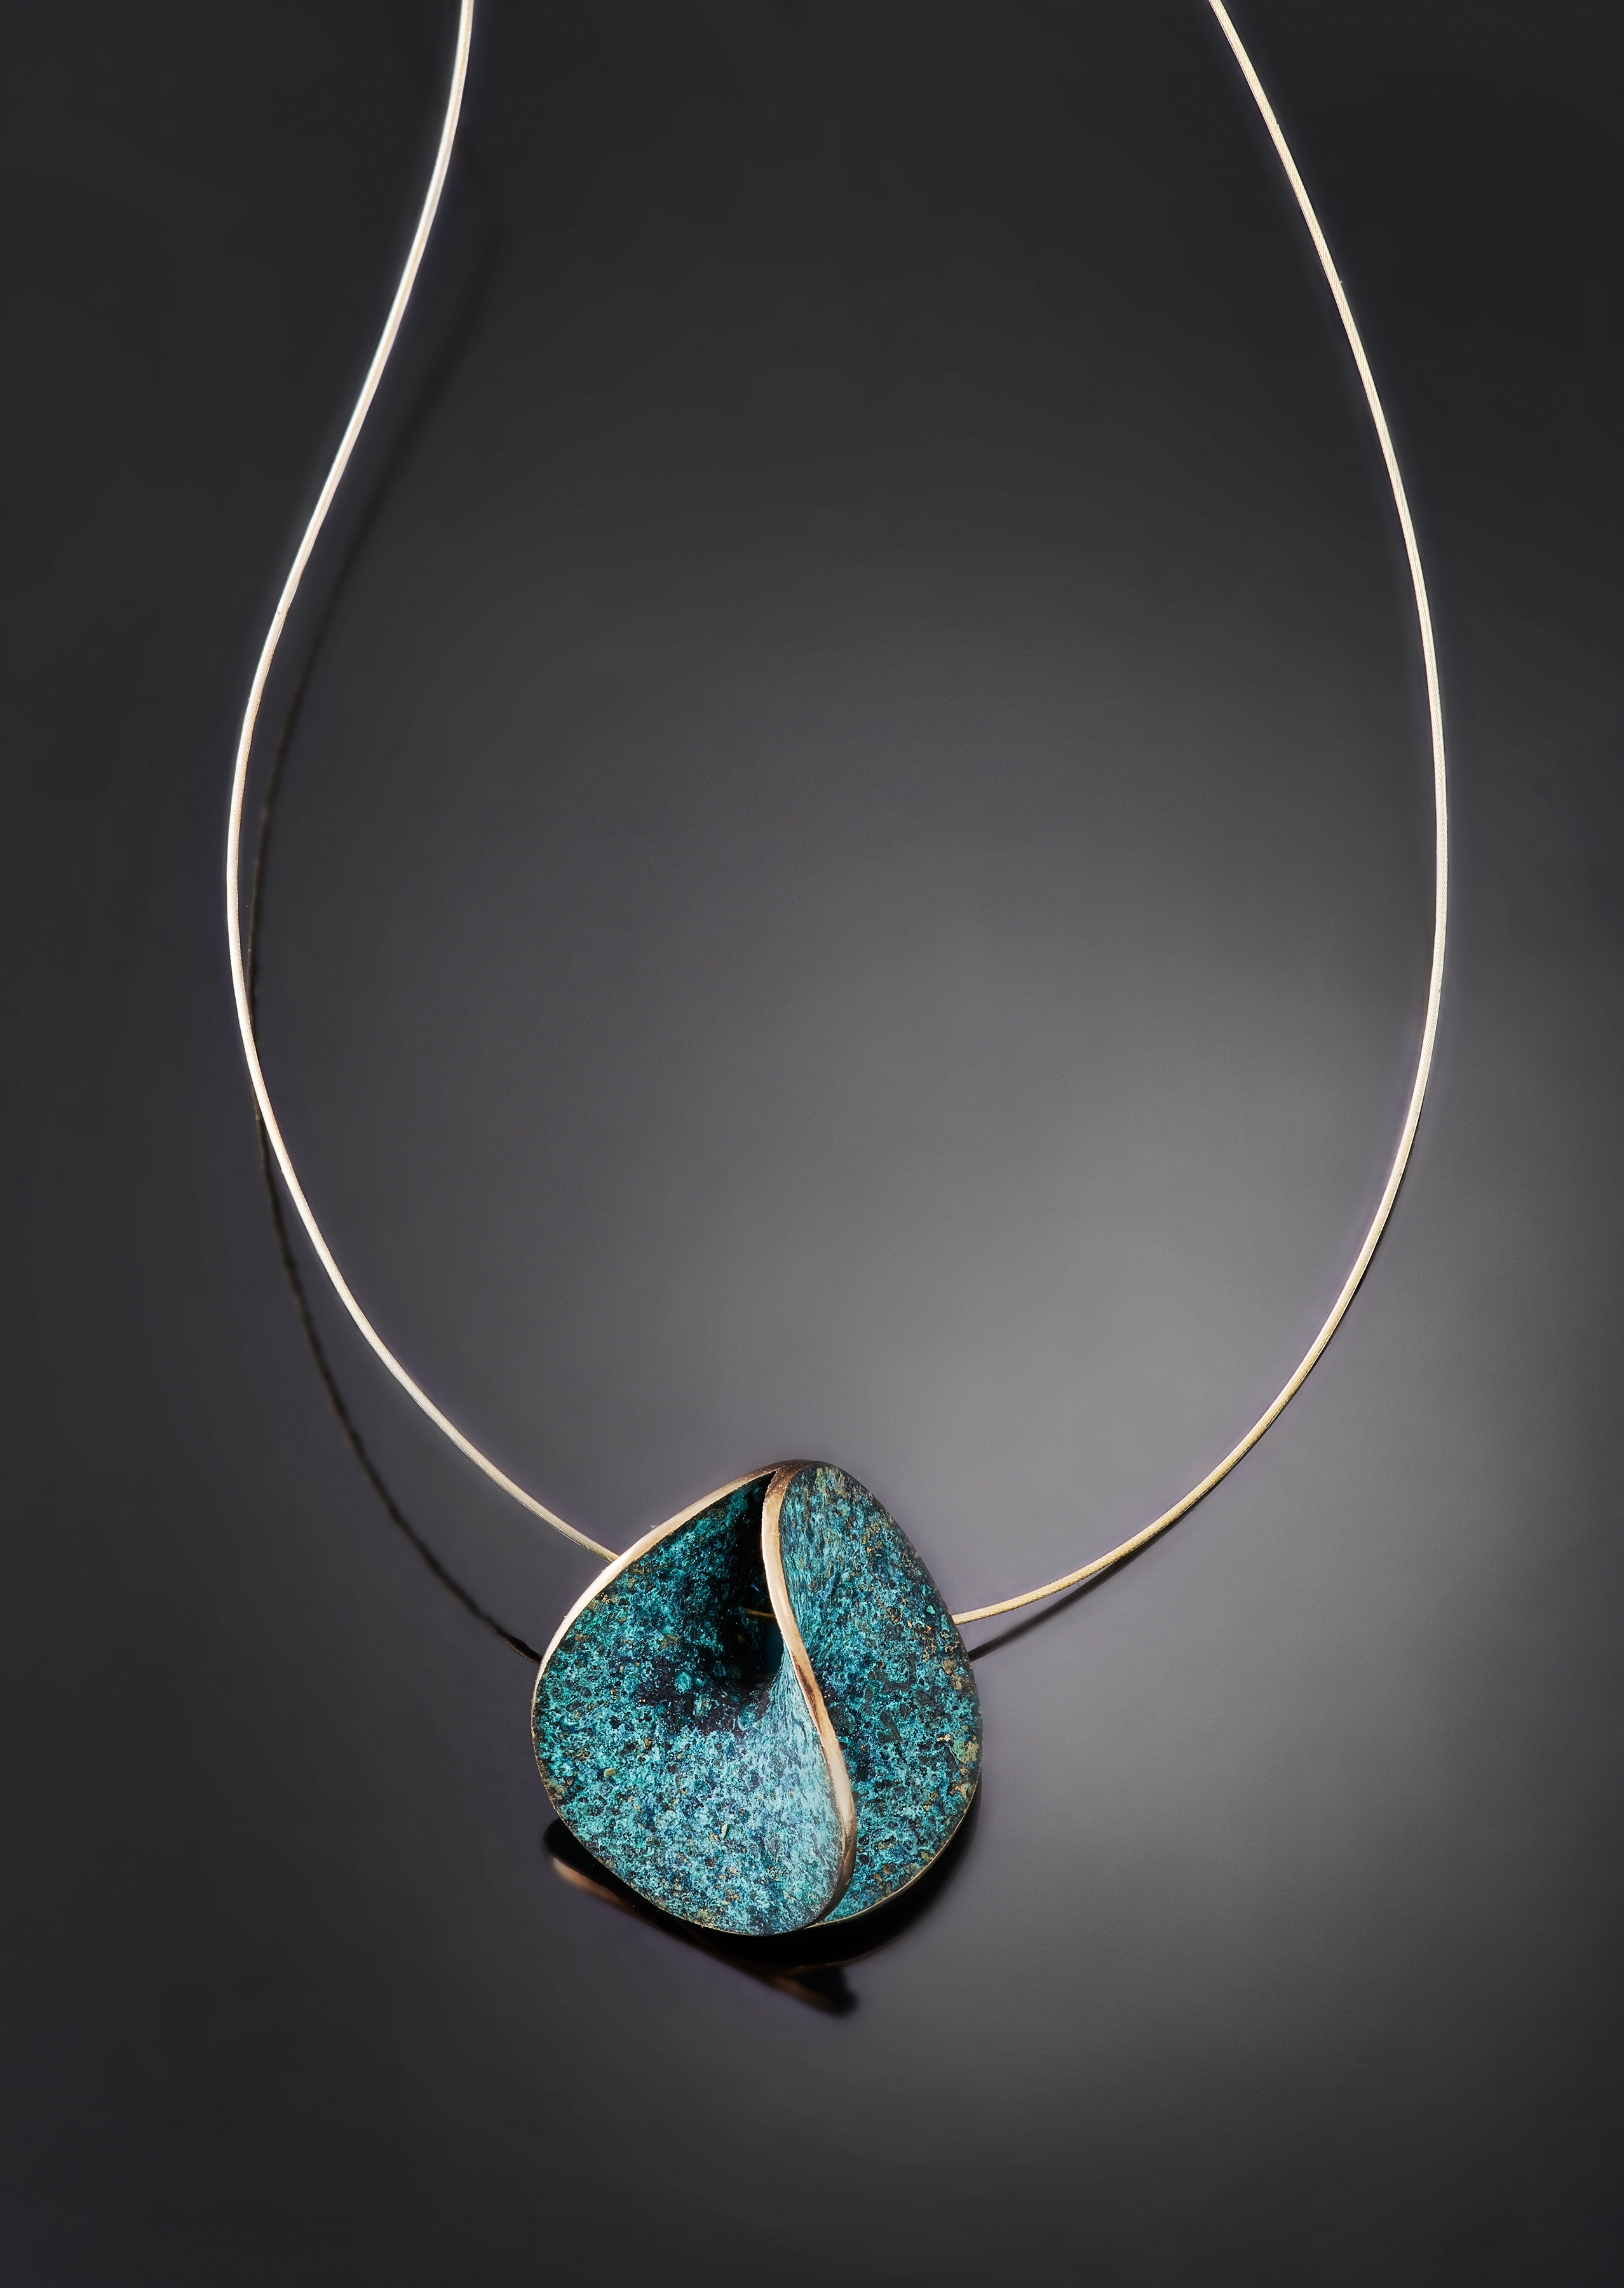 cast-bronze-enneper-pendant-with-classic-blue-green-patina-on-black